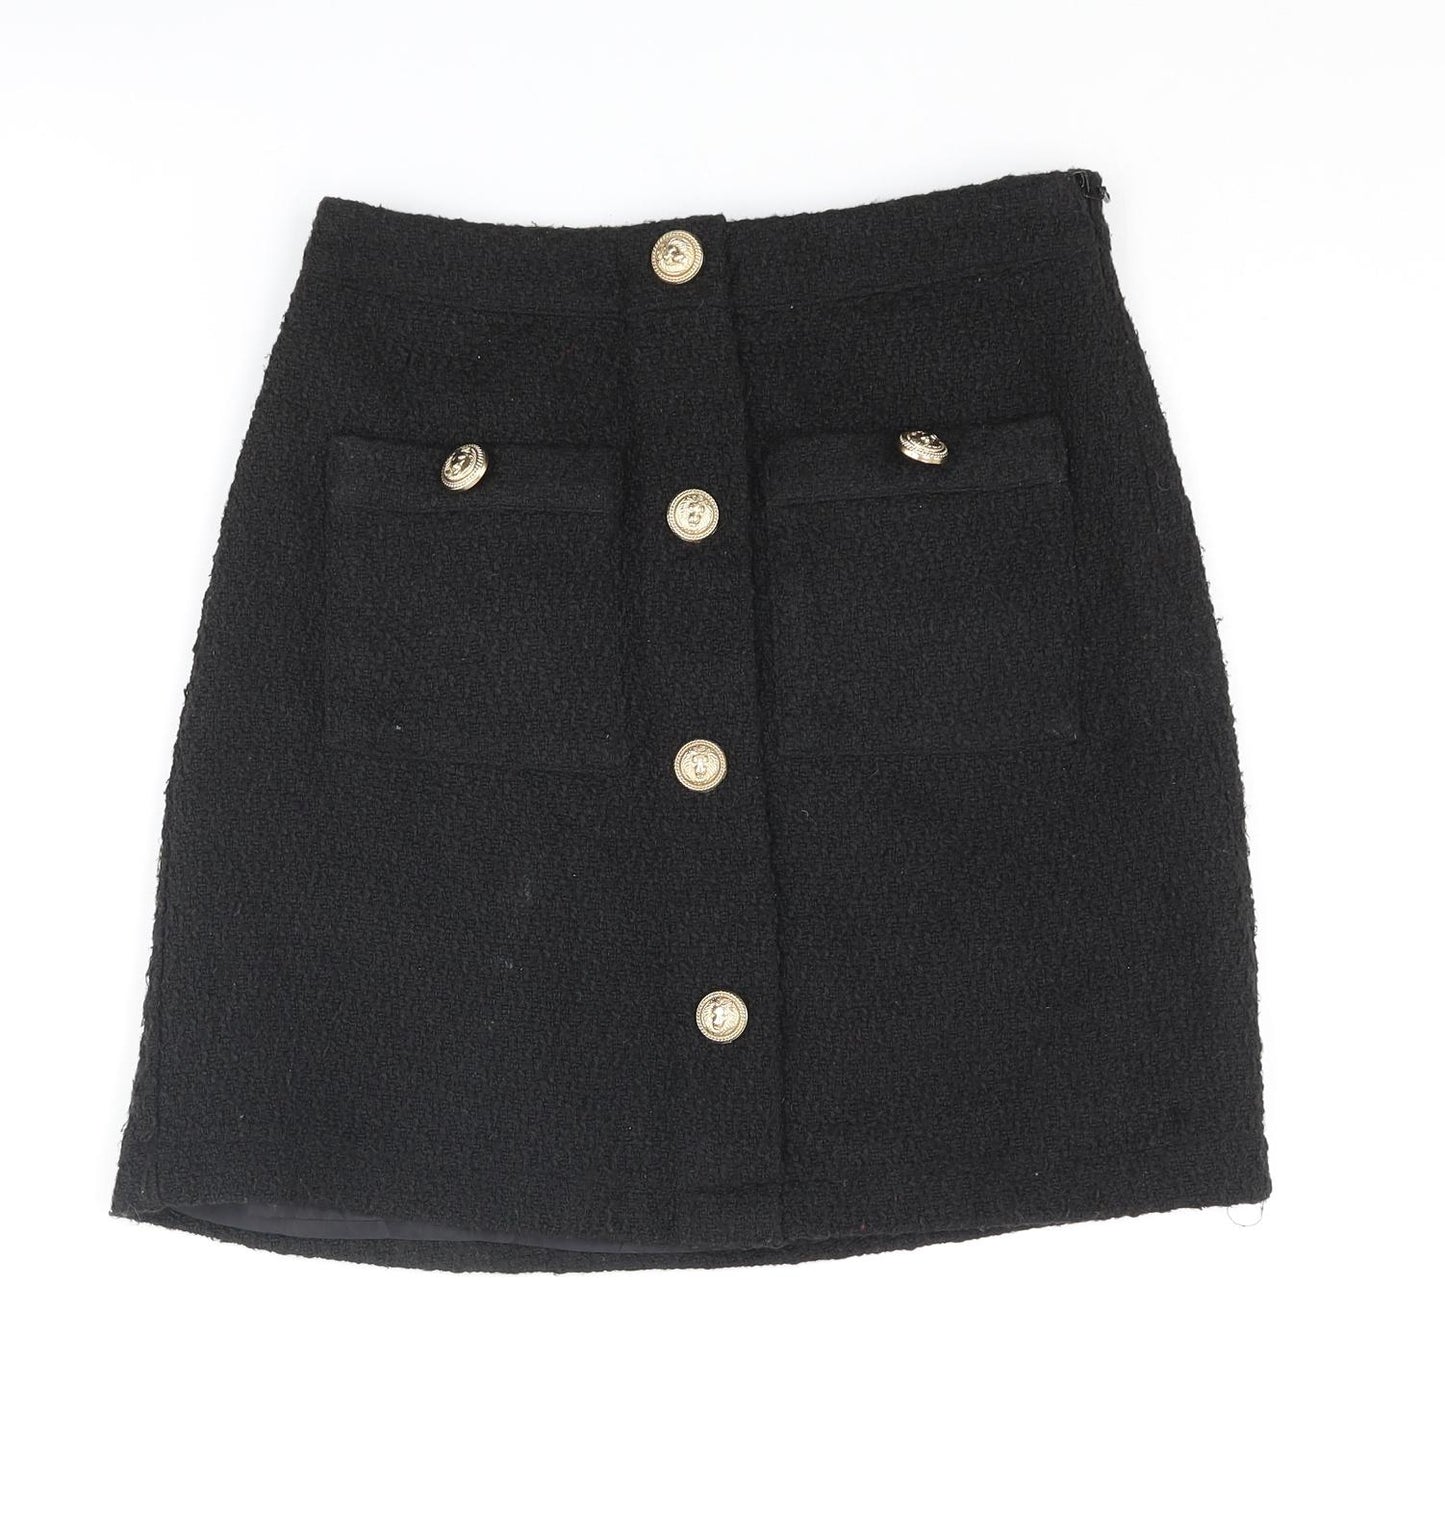 New Look Womens Black Polyester A-Line Skirt Size 6 Zip